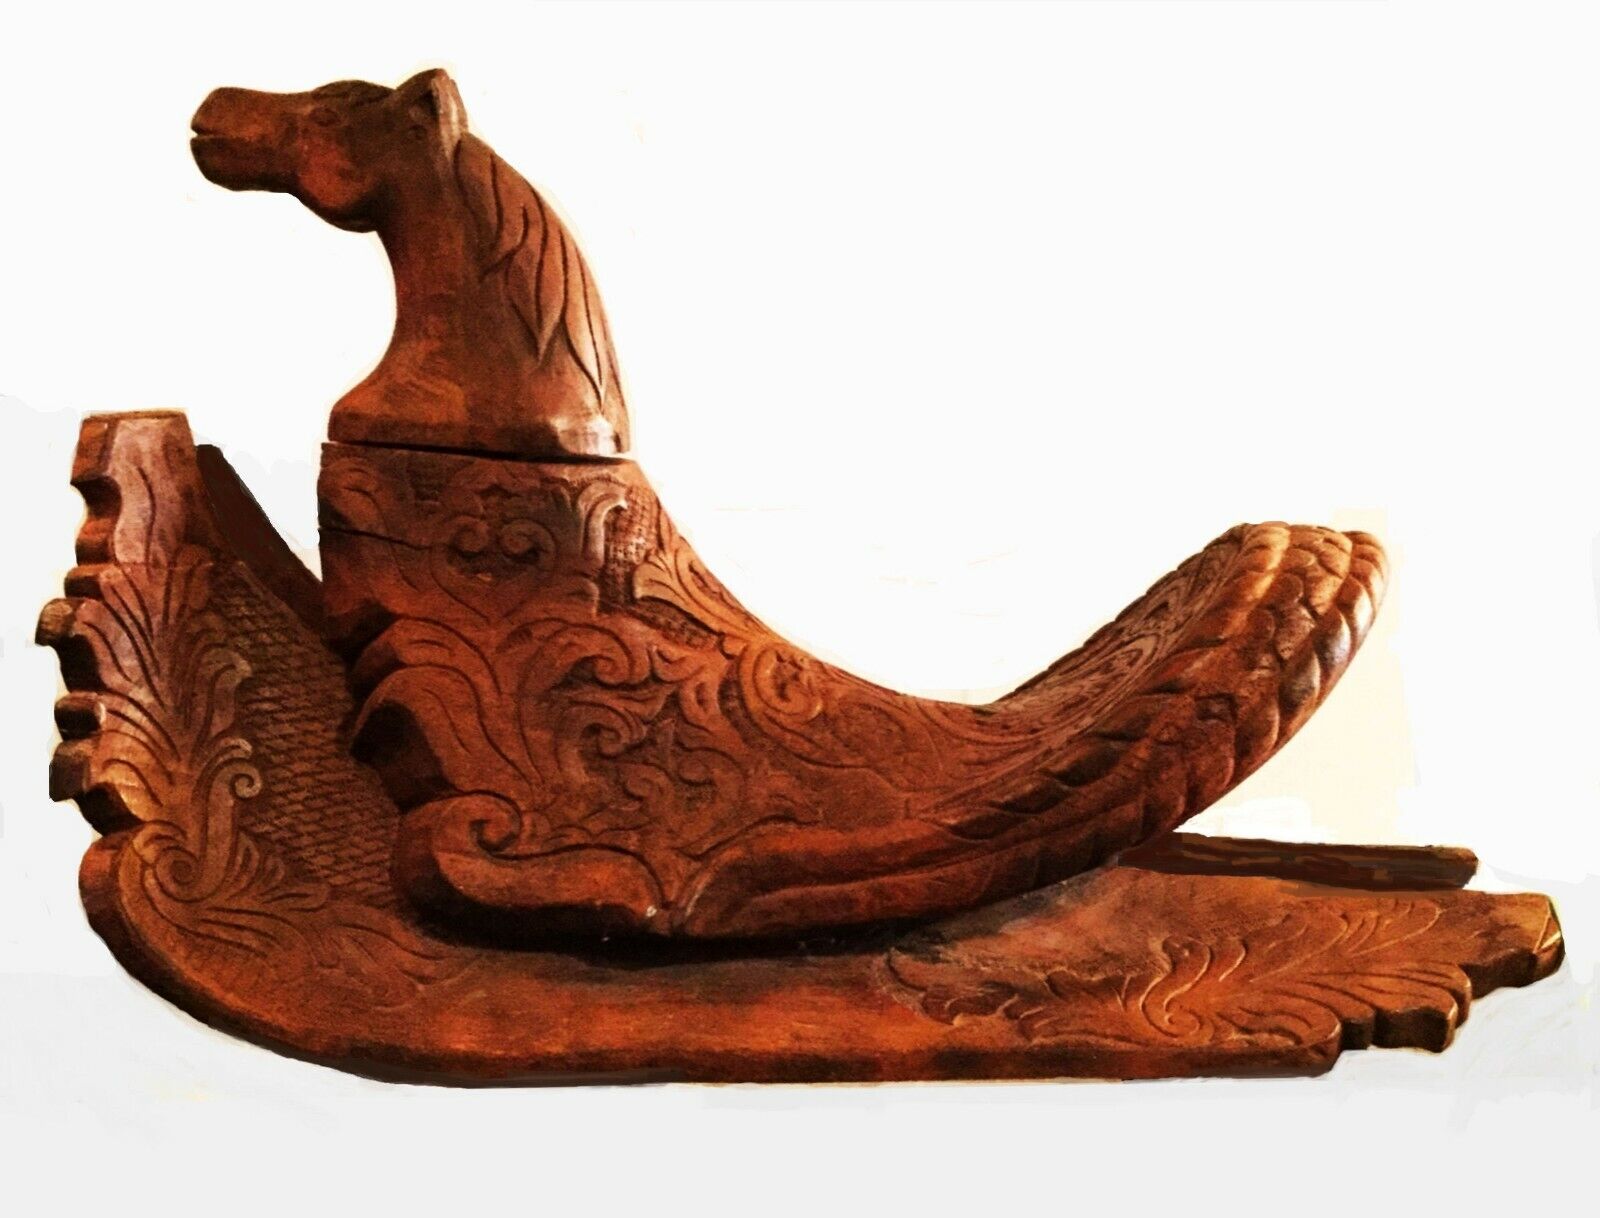 Antique East Asian Saddle. Hand carved wood. Juvenile or for Mongolian horses.